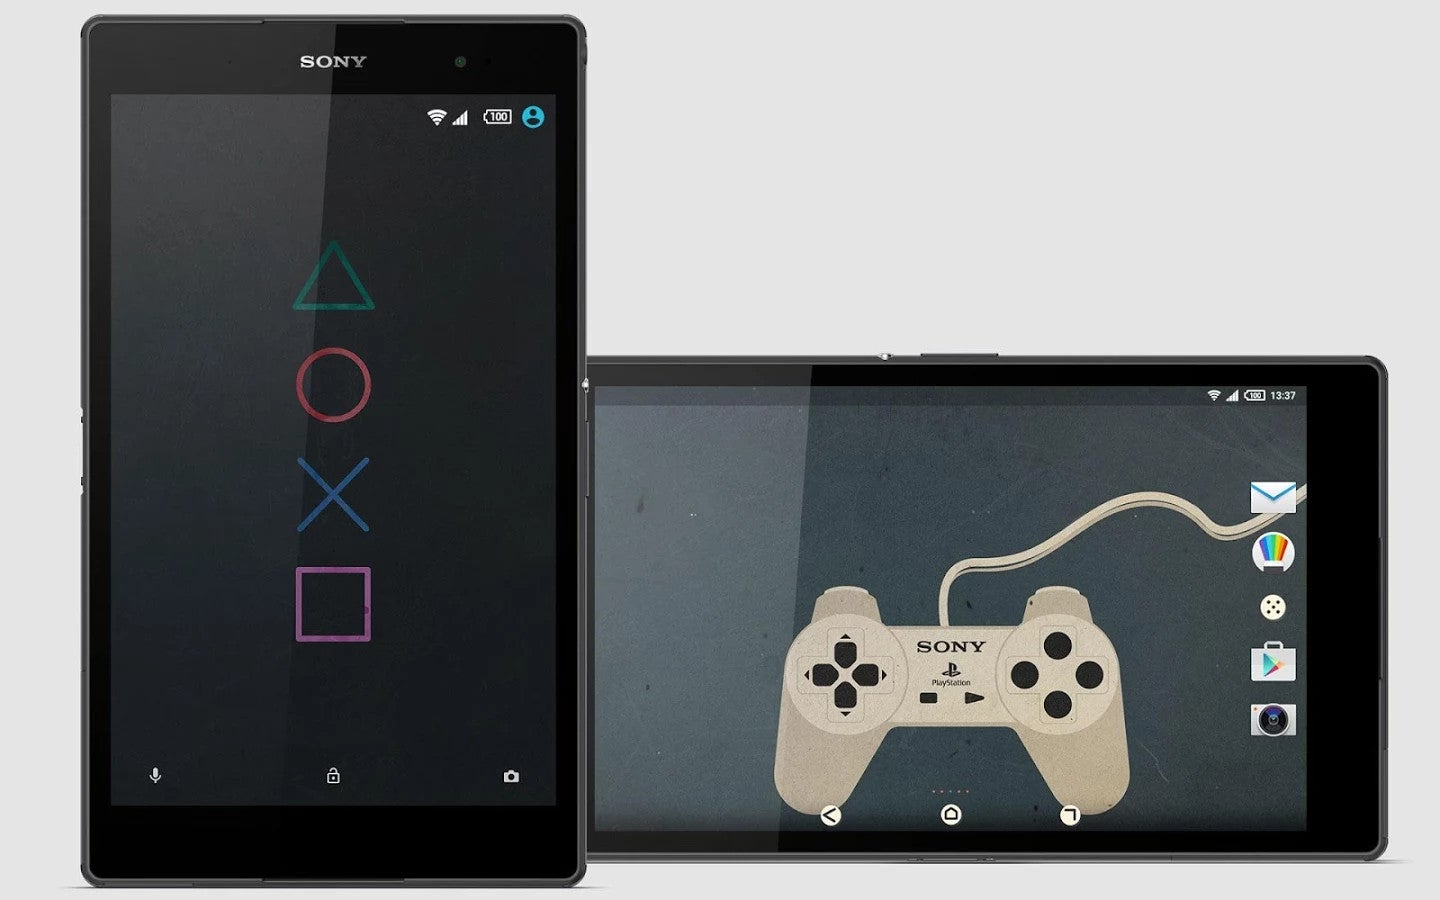 Sony launching five new Xperia retro themes featuring PlayStation's iconic design